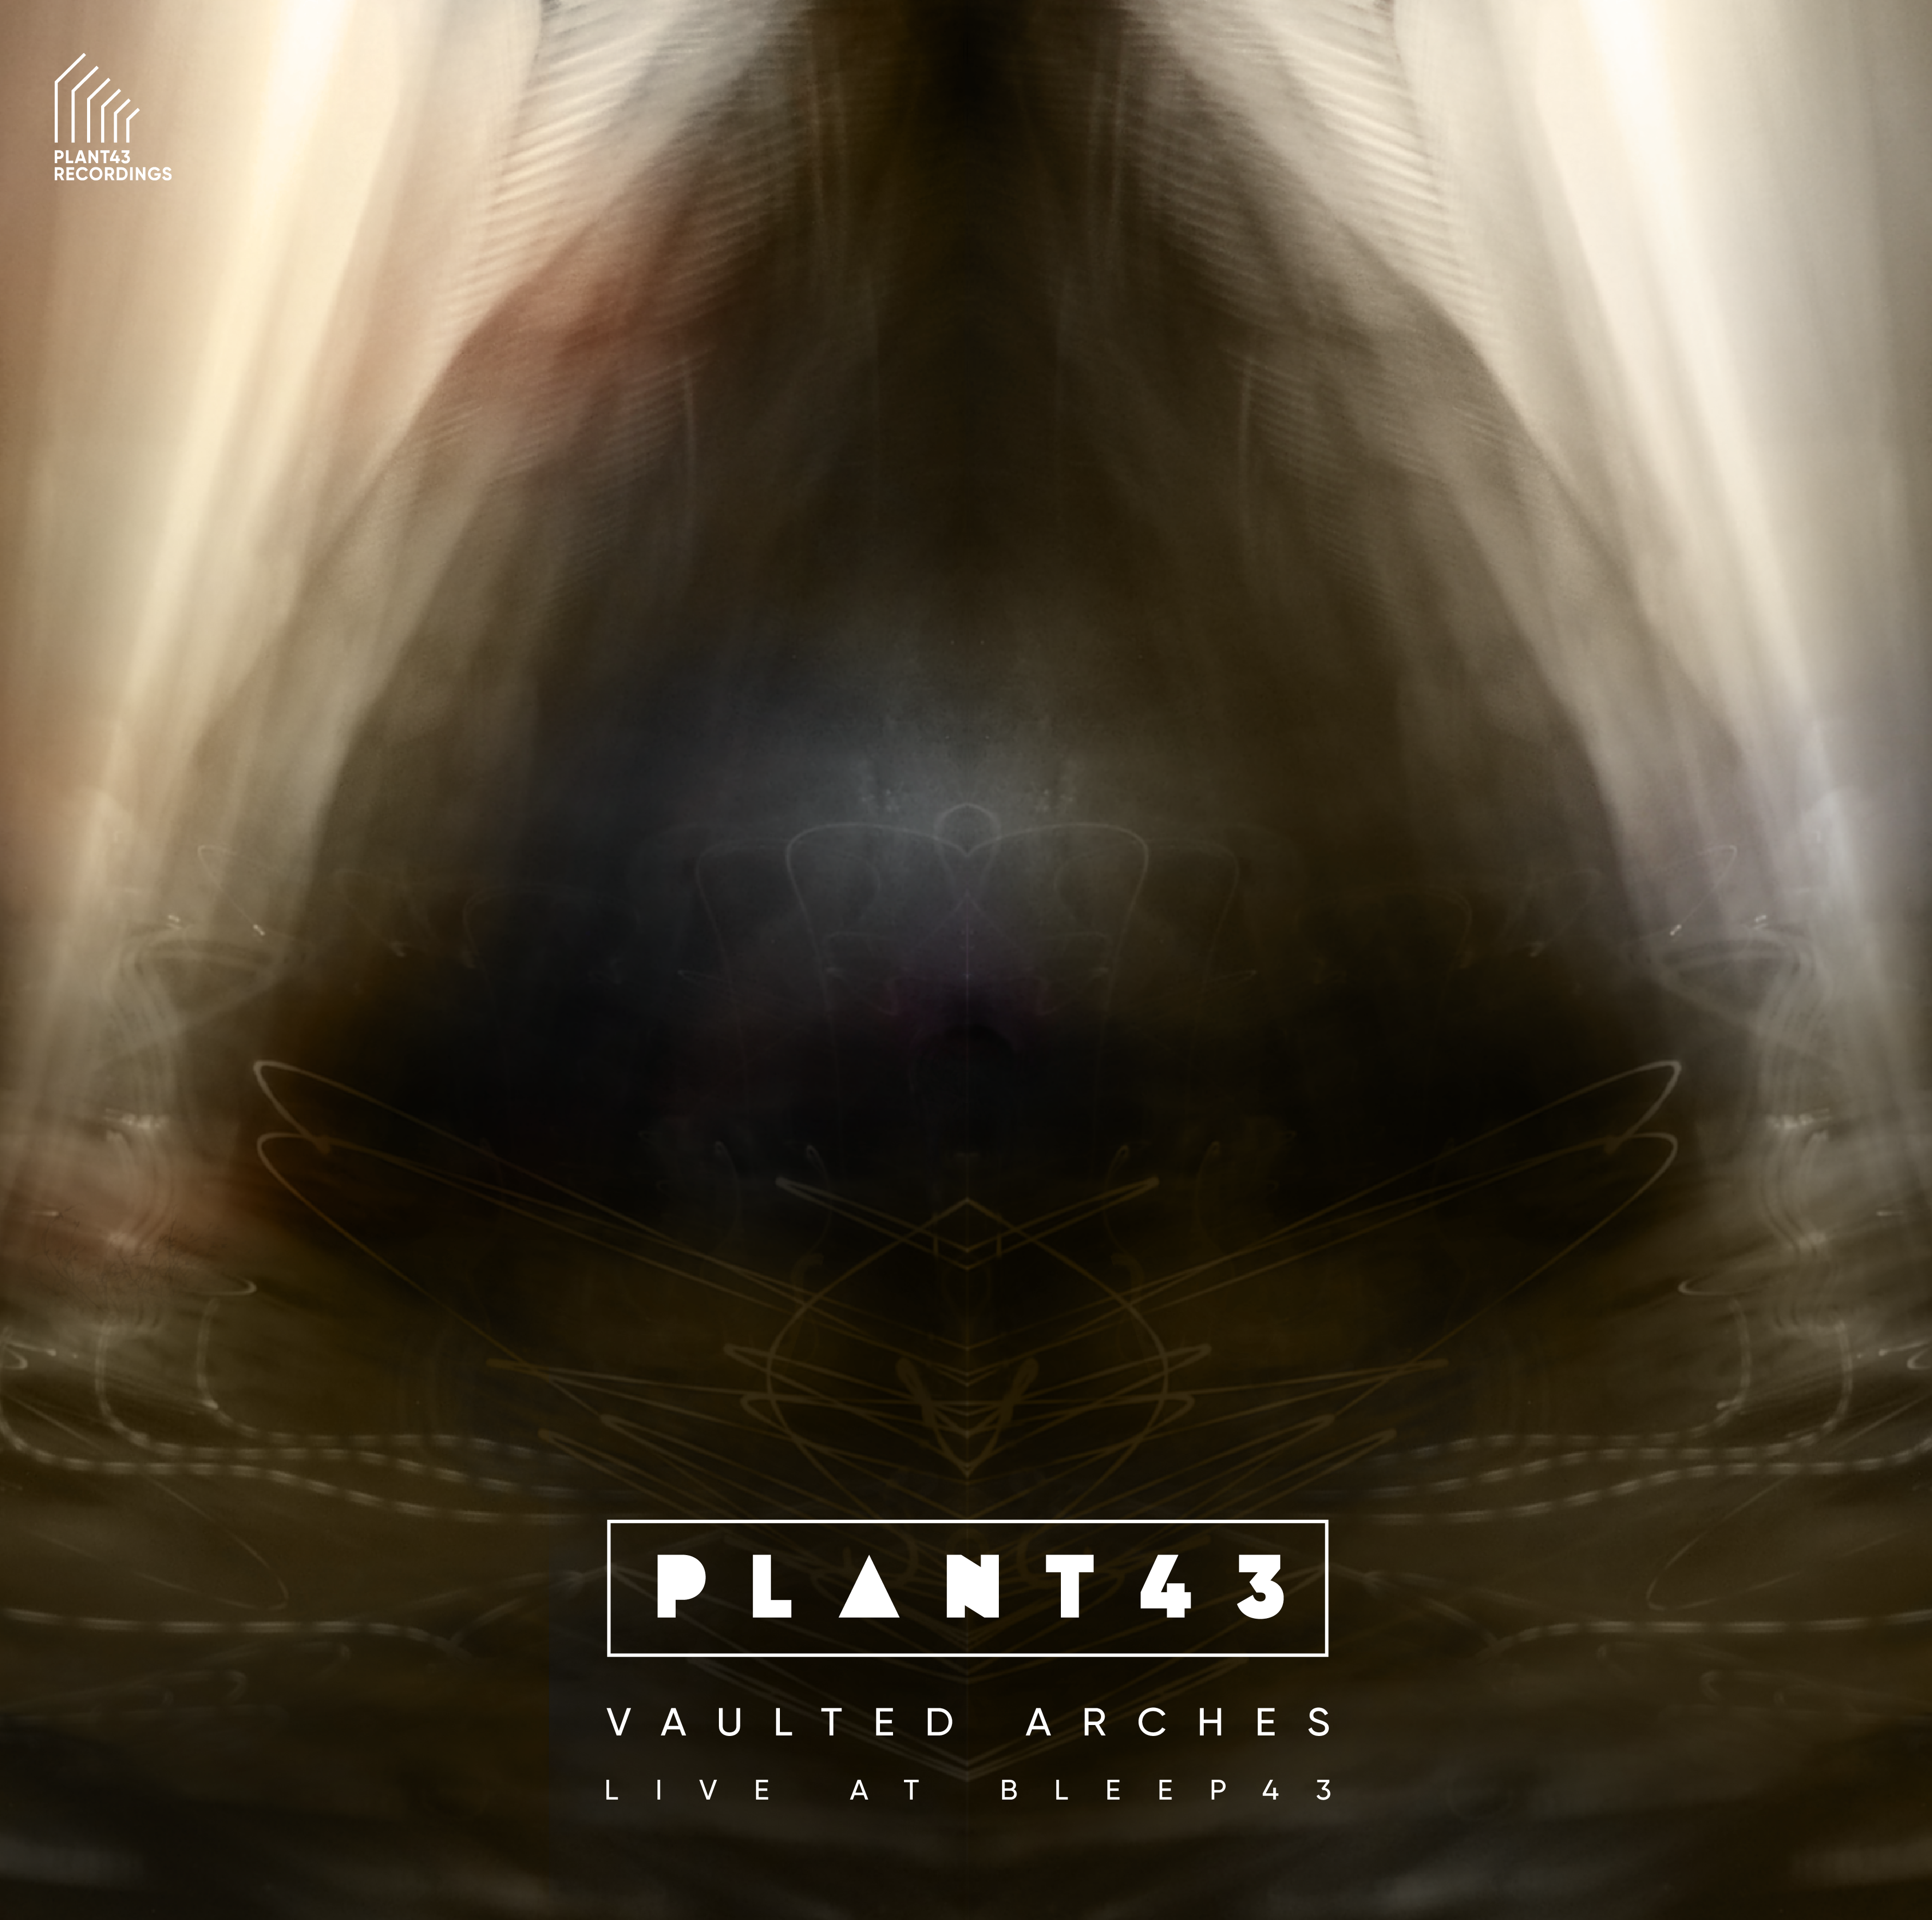 Release “Vaulted Arches: Live at Bleep43” by Plant43 - MusicBrainz